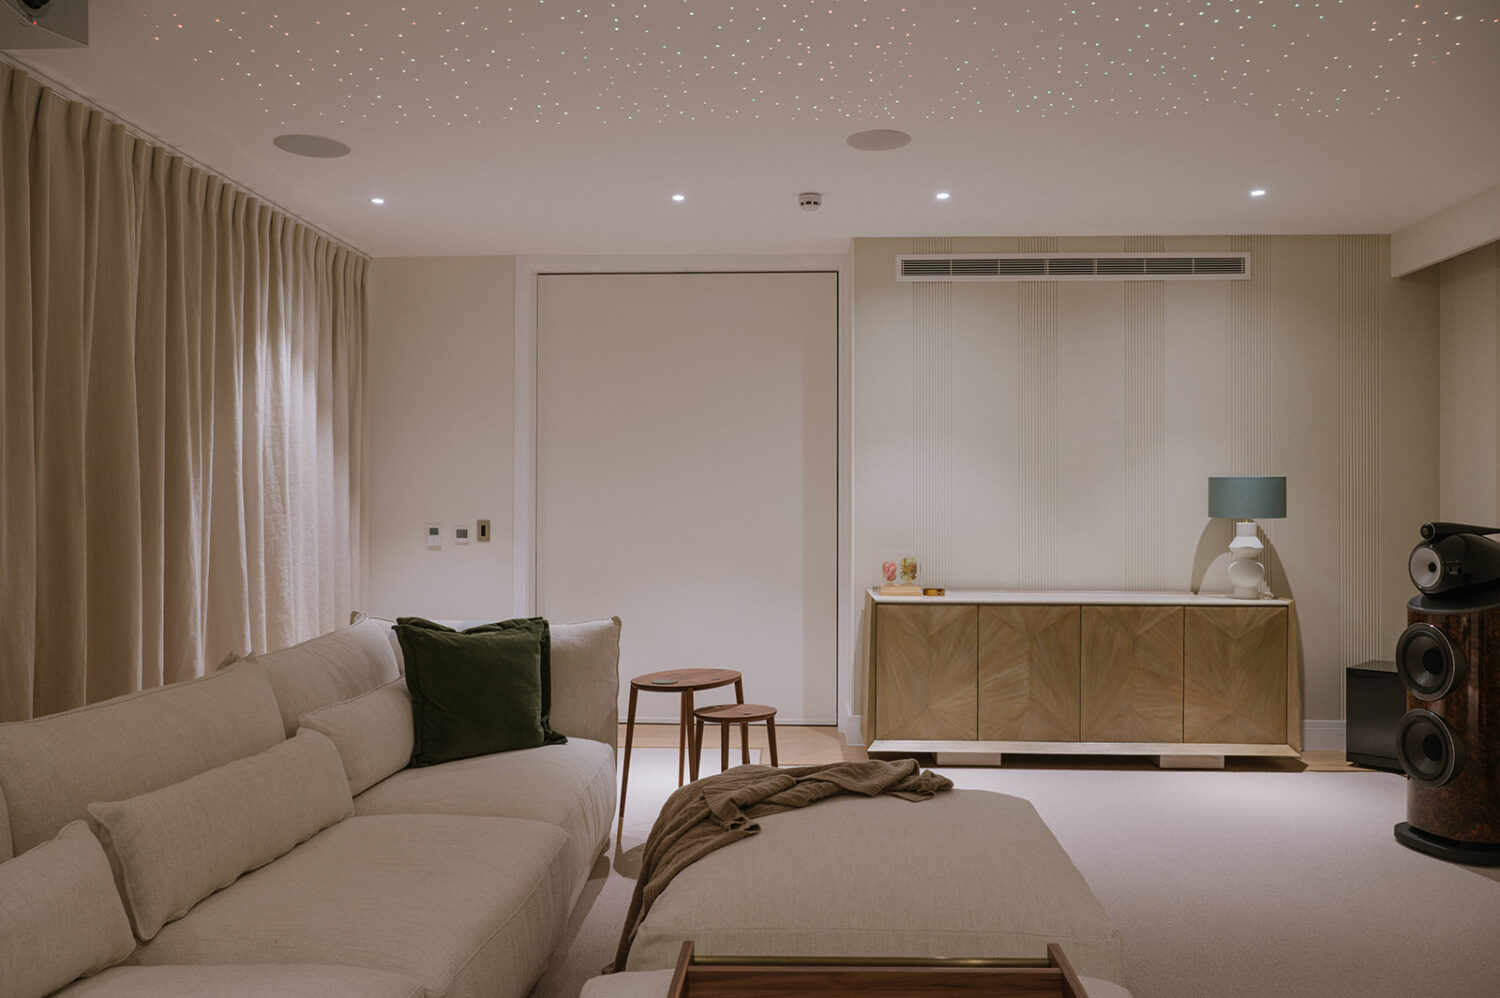 A wider view of the cinema room in a recently refurbished Hampstead home.